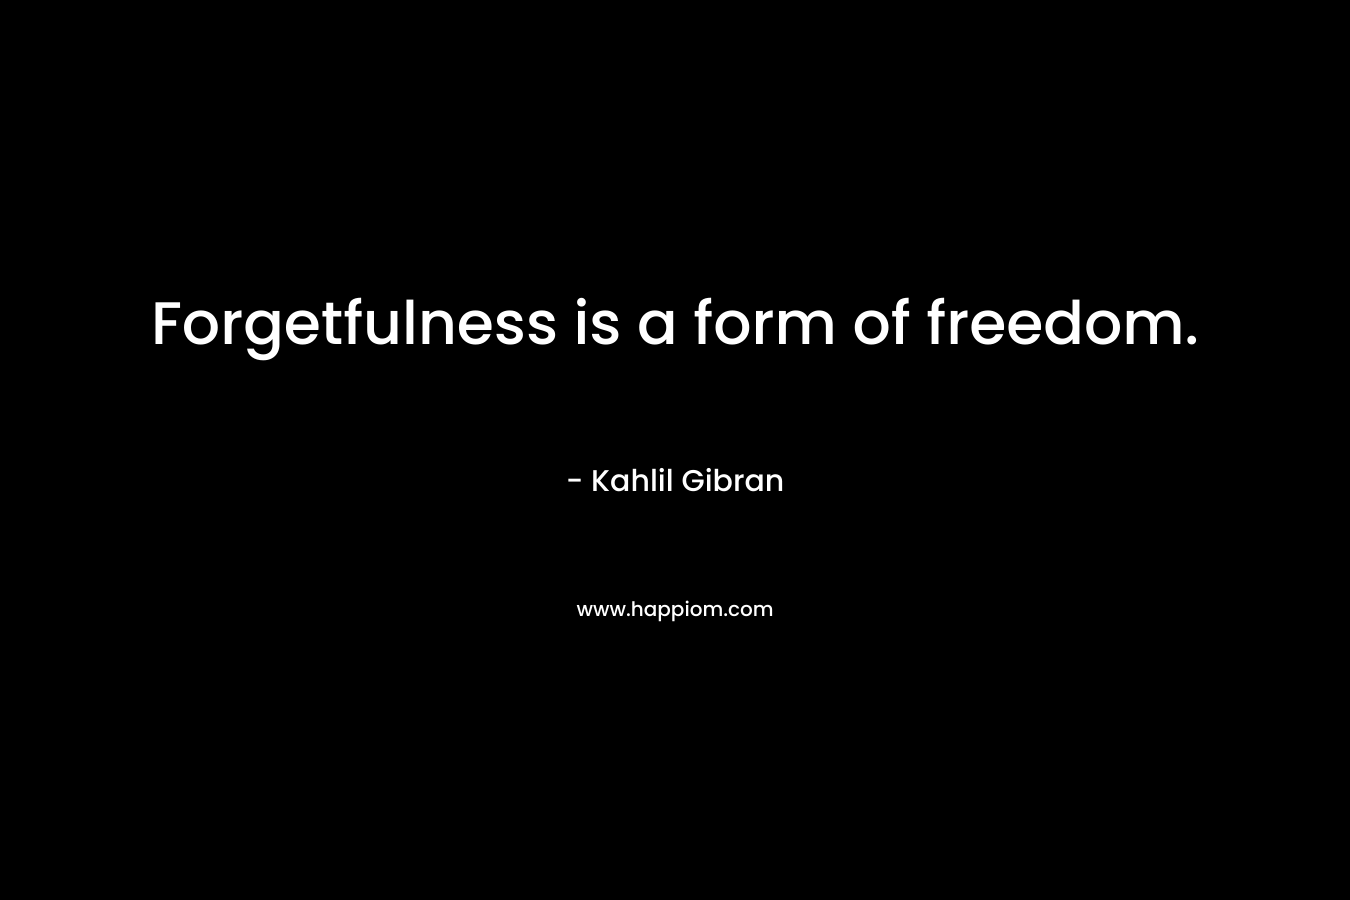 Forgetfulness is a form of freedom.